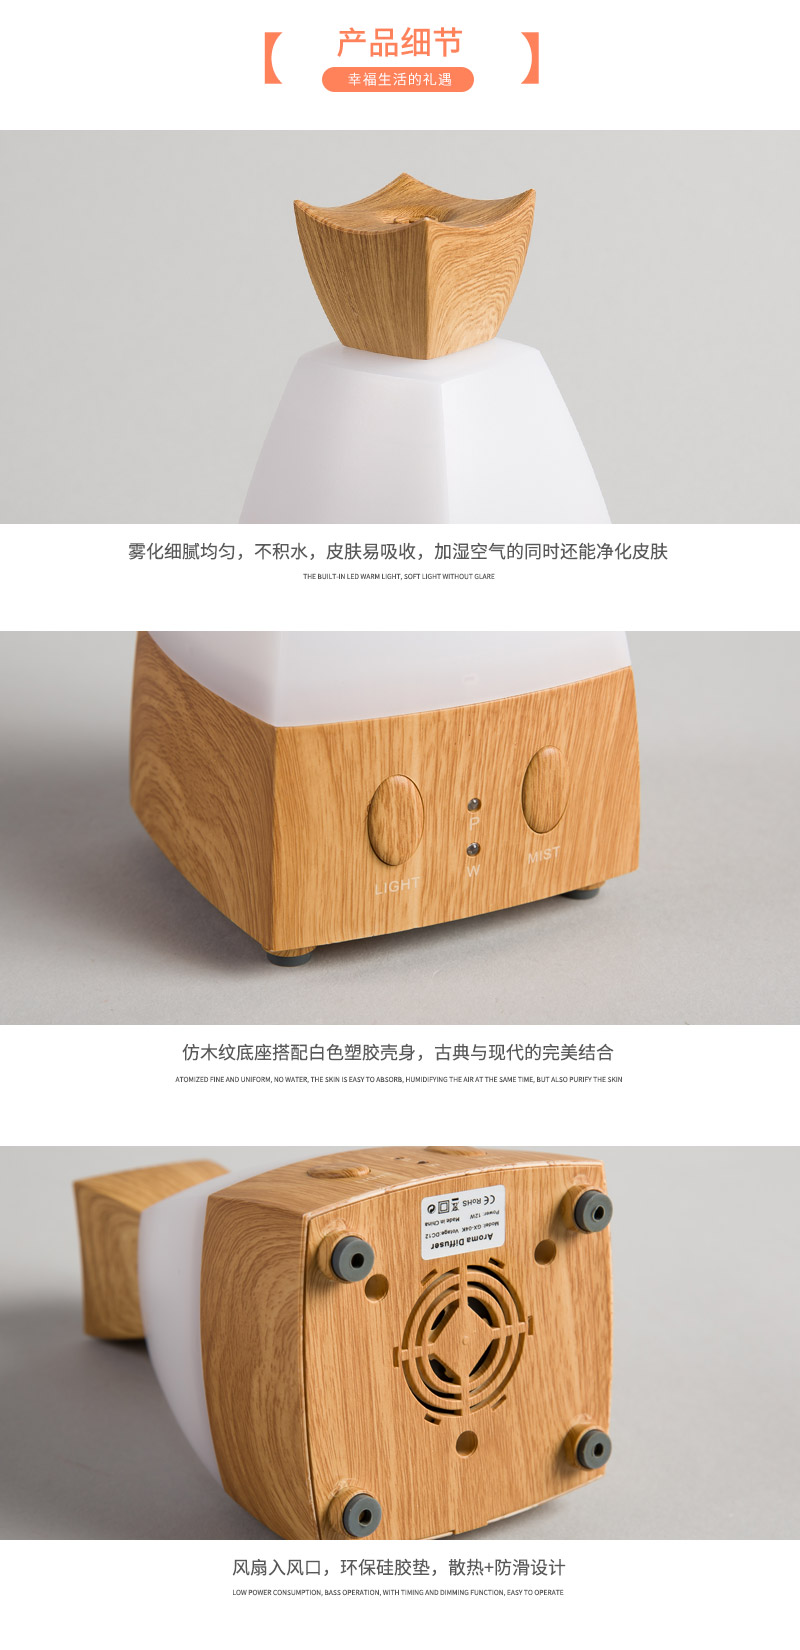 04K light wood color wood humidifier5